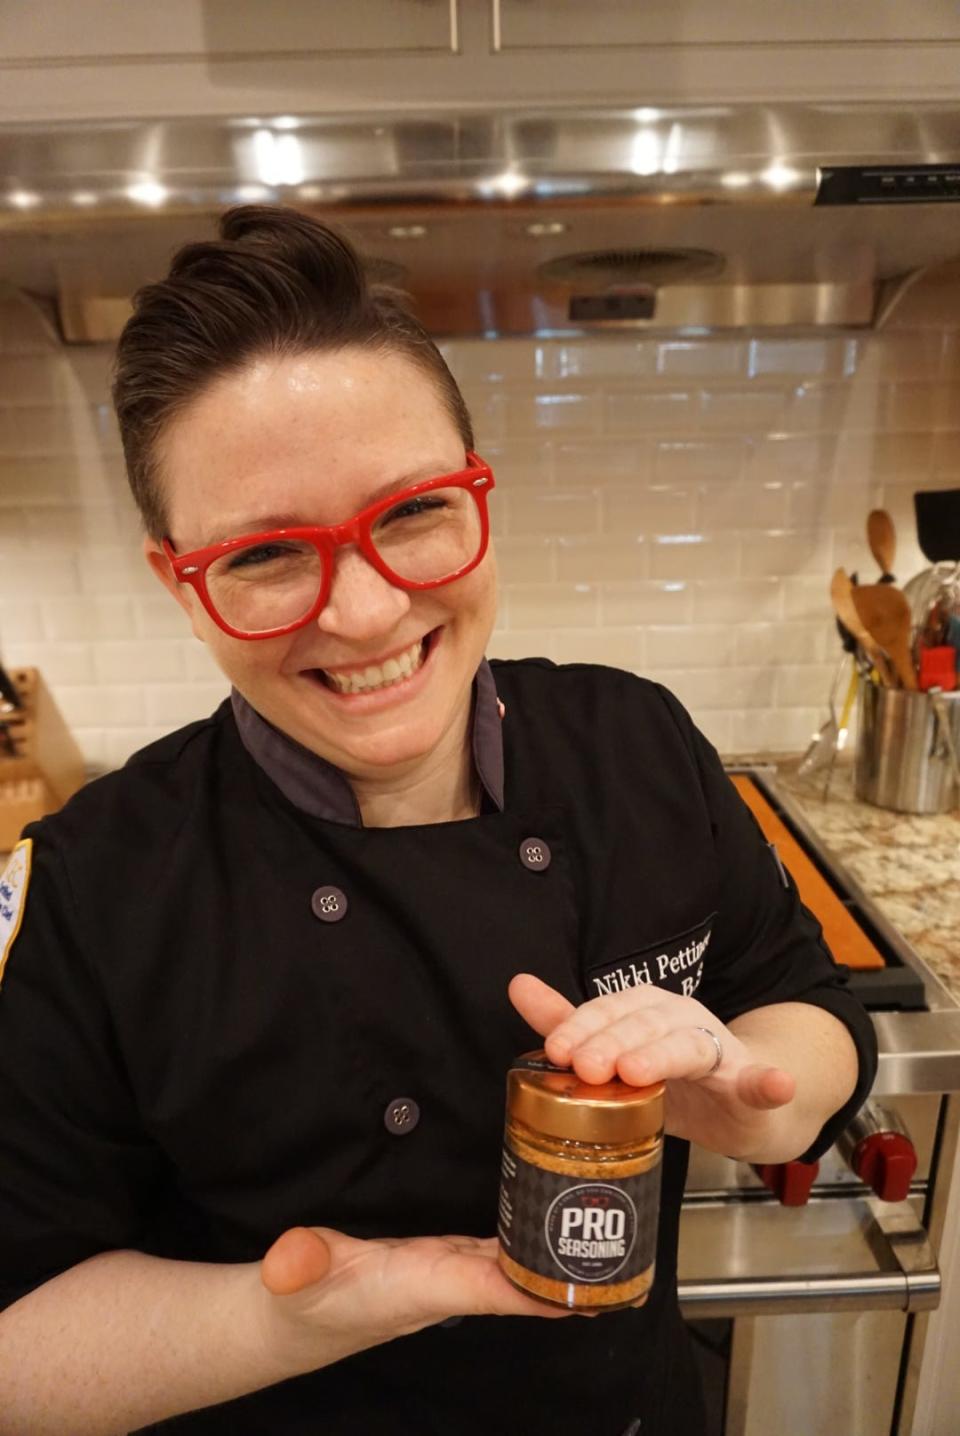 Nikki Pettineo is featured on the new TBS cooking show, "Rat in the Kitchen."